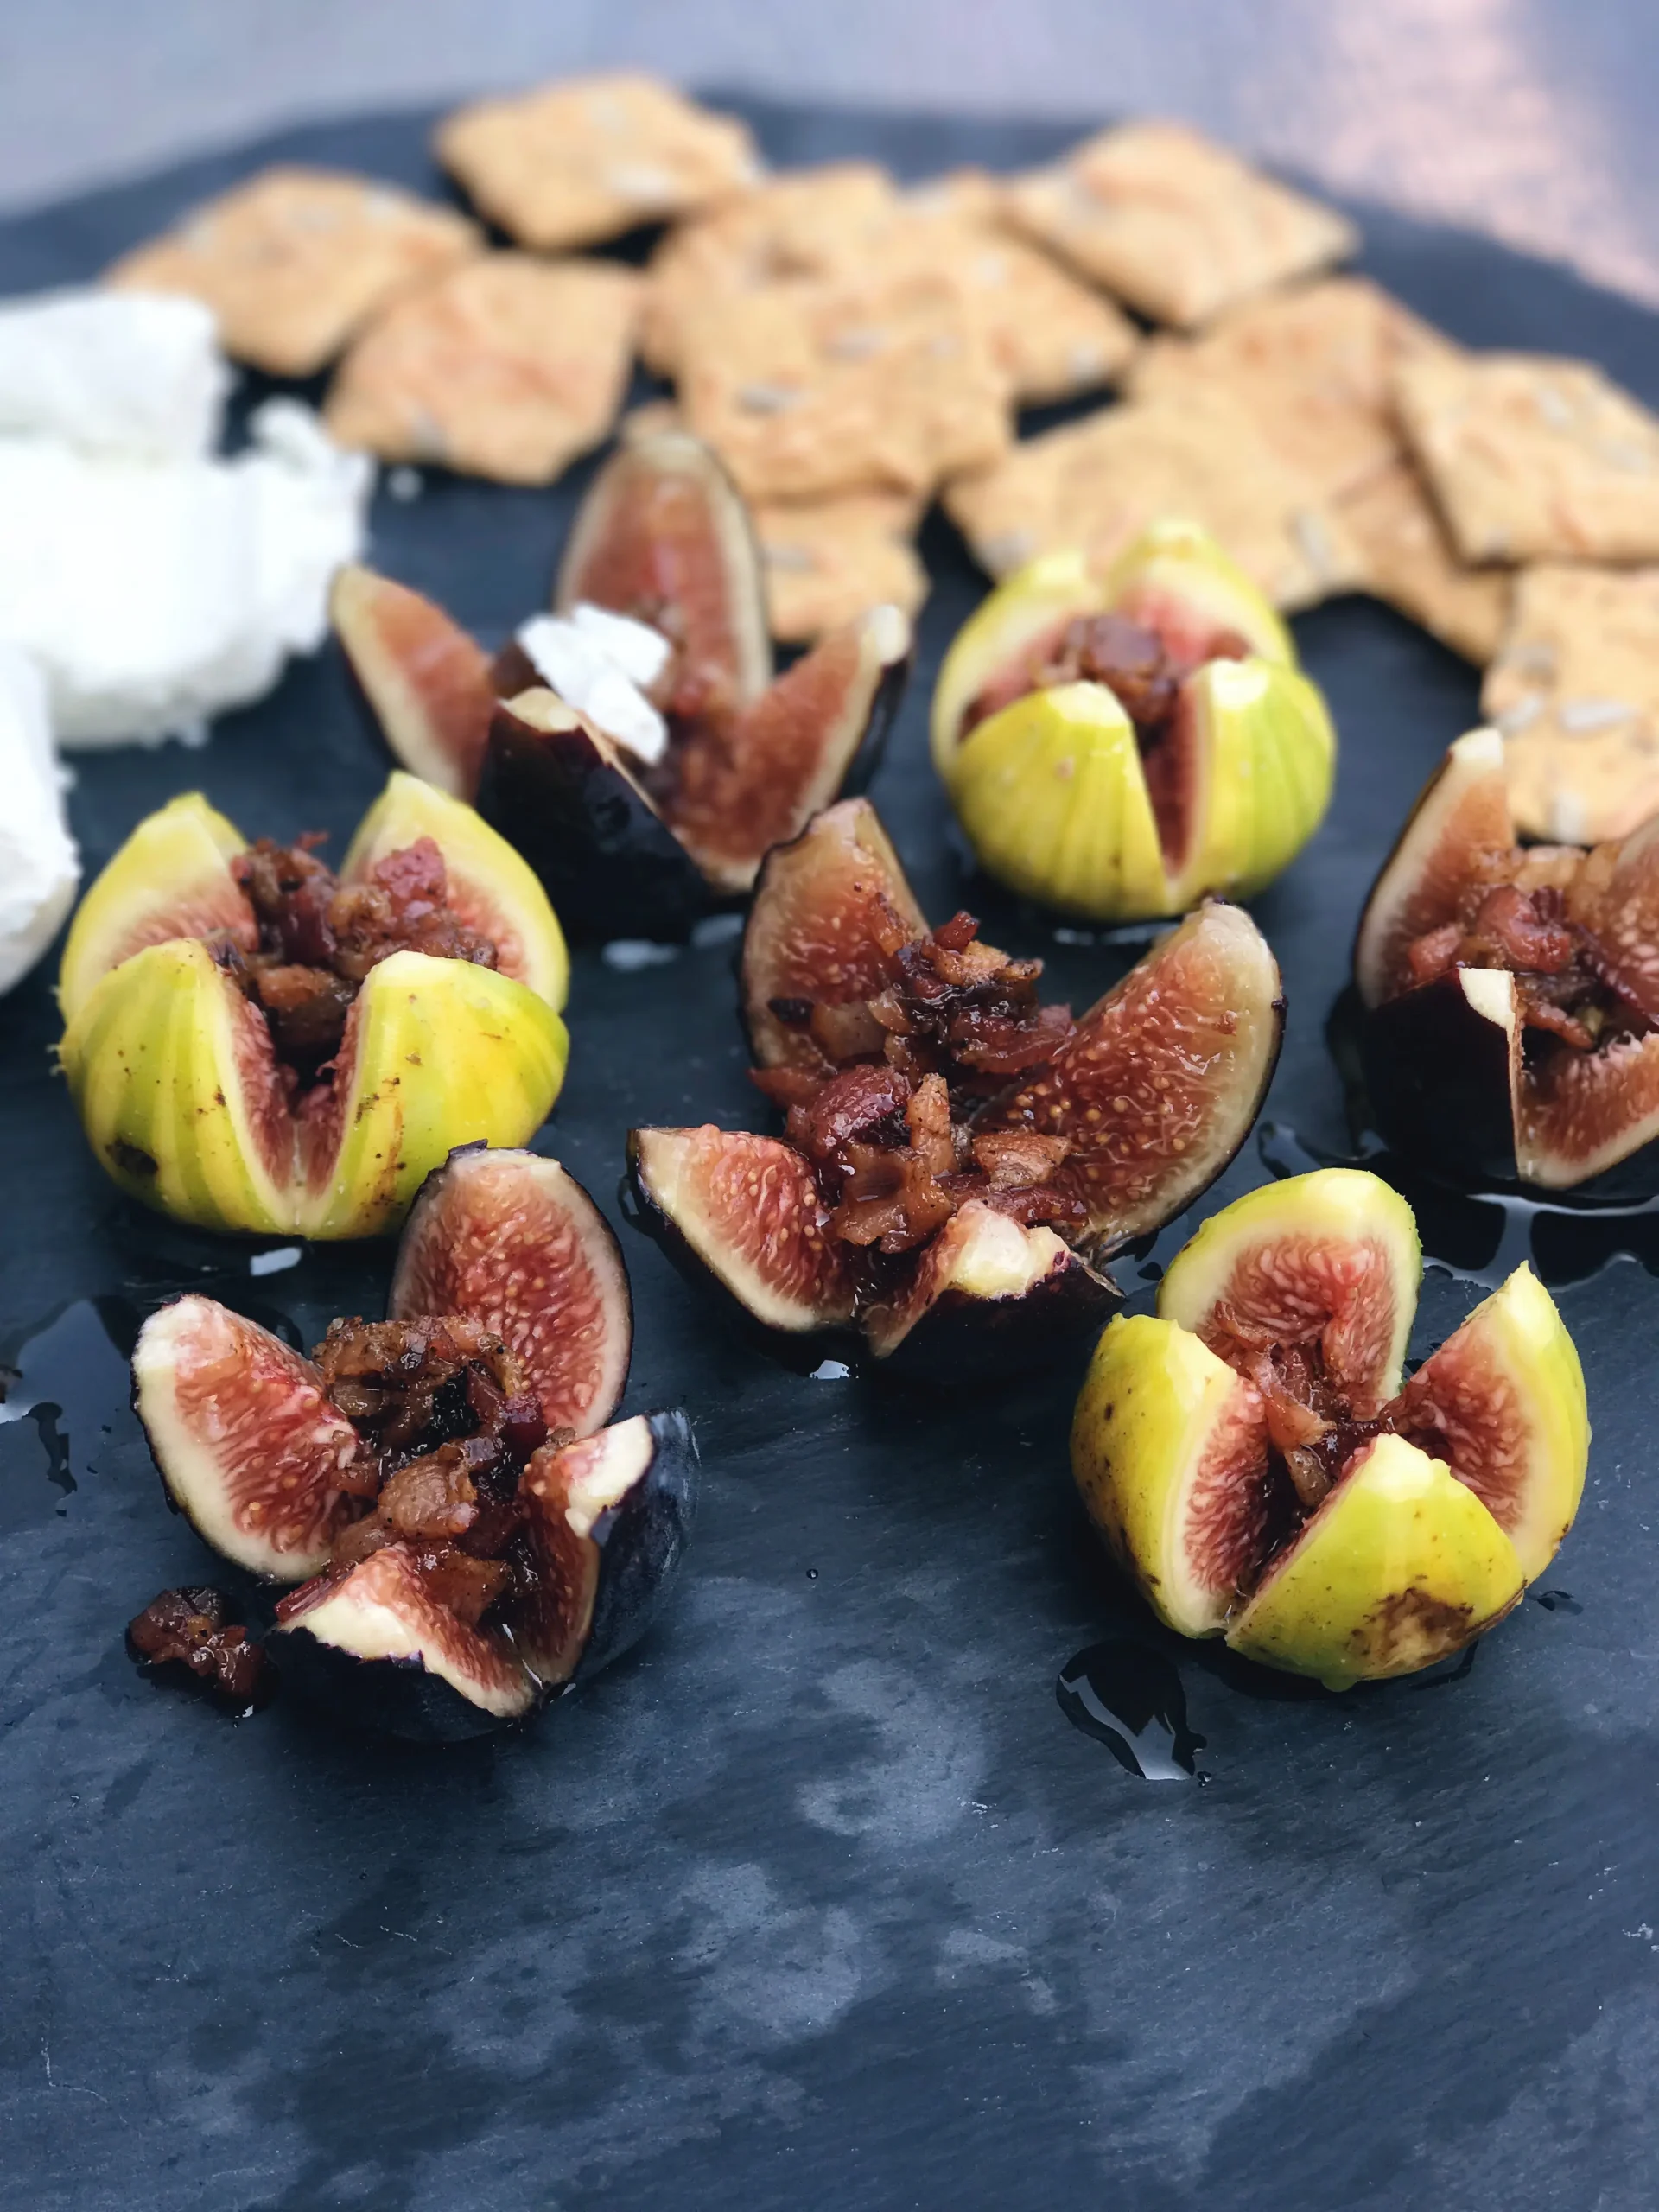 smoked figs - How long does it take to smoke figs